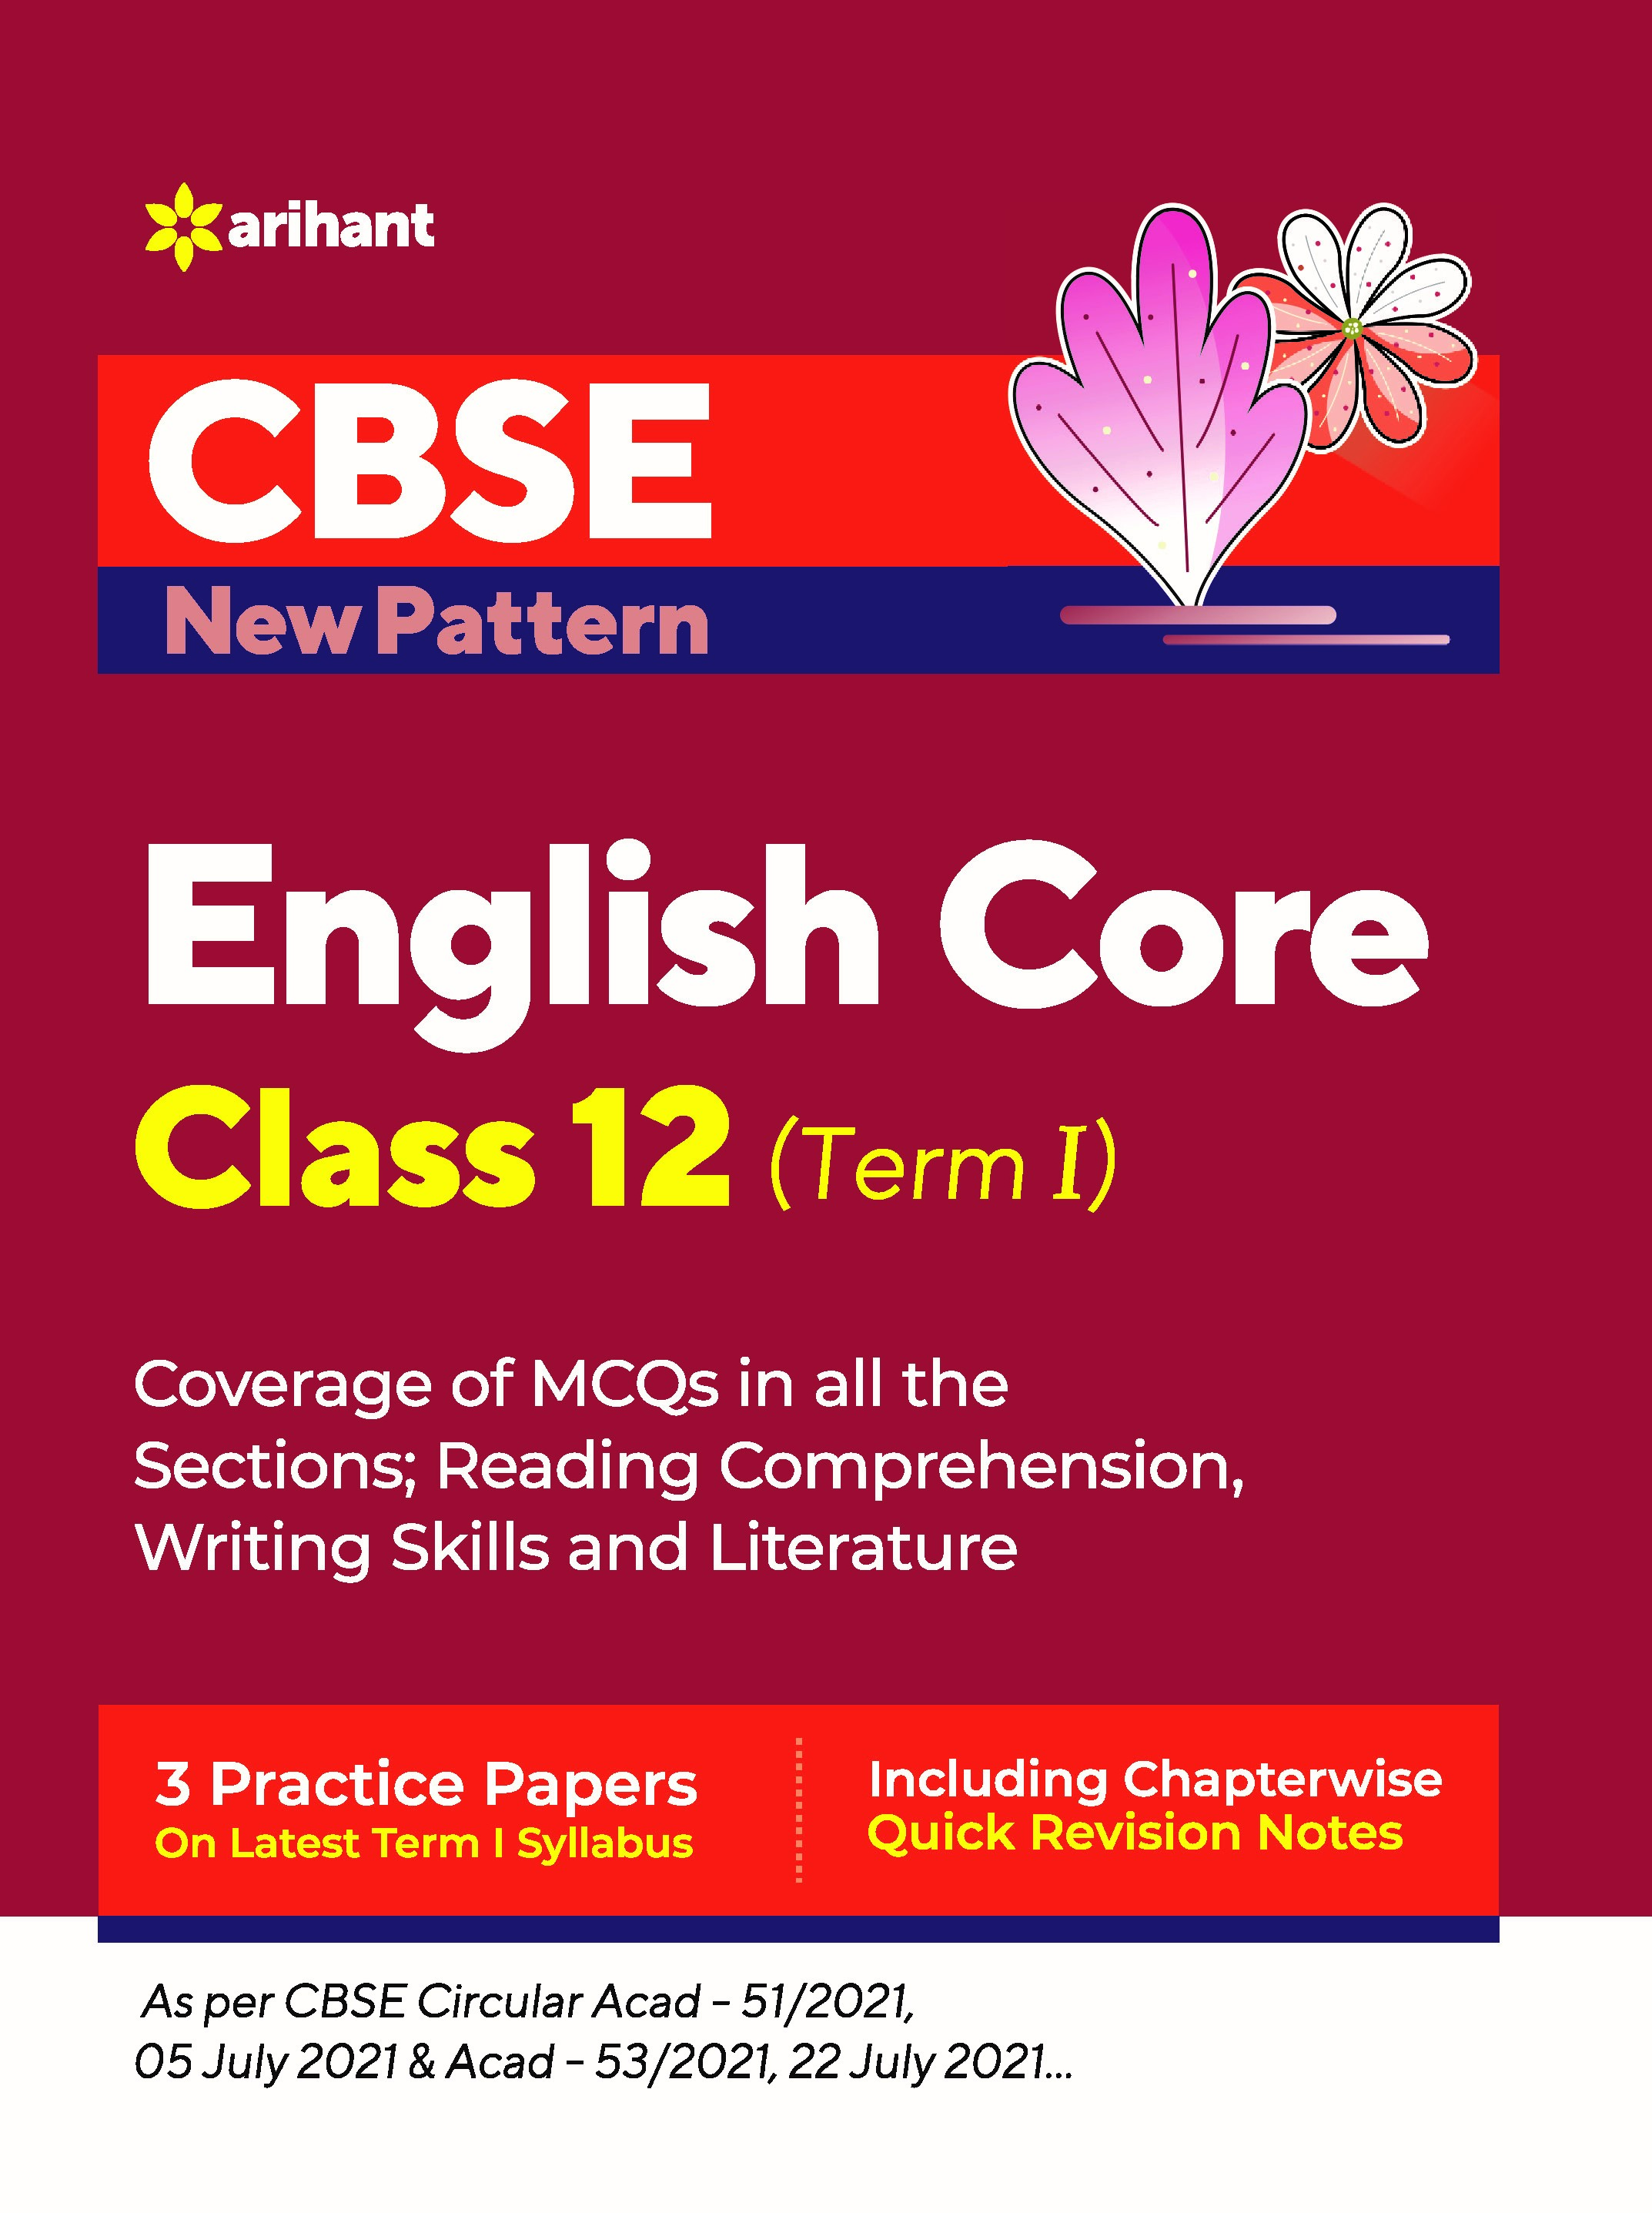 CBSE New Pattern English Core Class 12 for 2021-22 Exam (MCQs based book for Term 1)